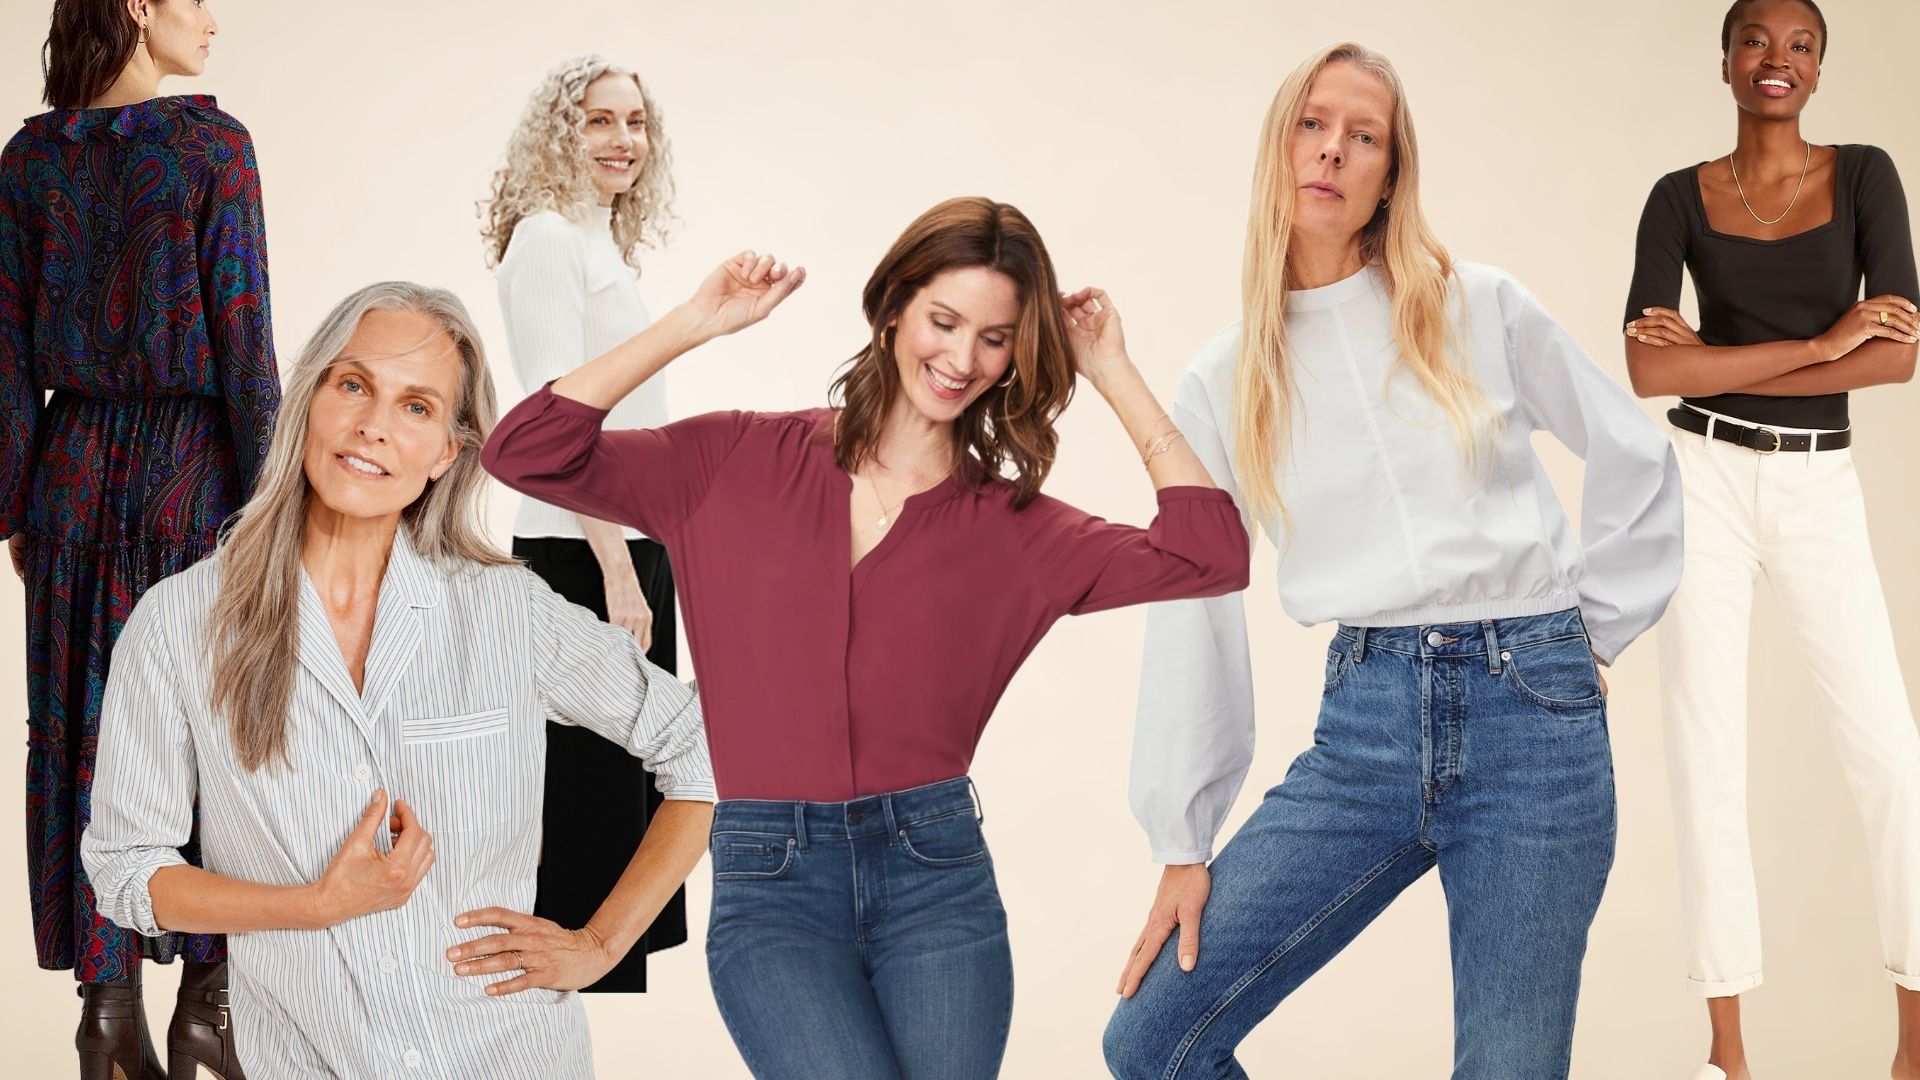 21 Best Clothing Stores for Women Over 50 in 2022 - Woman's World